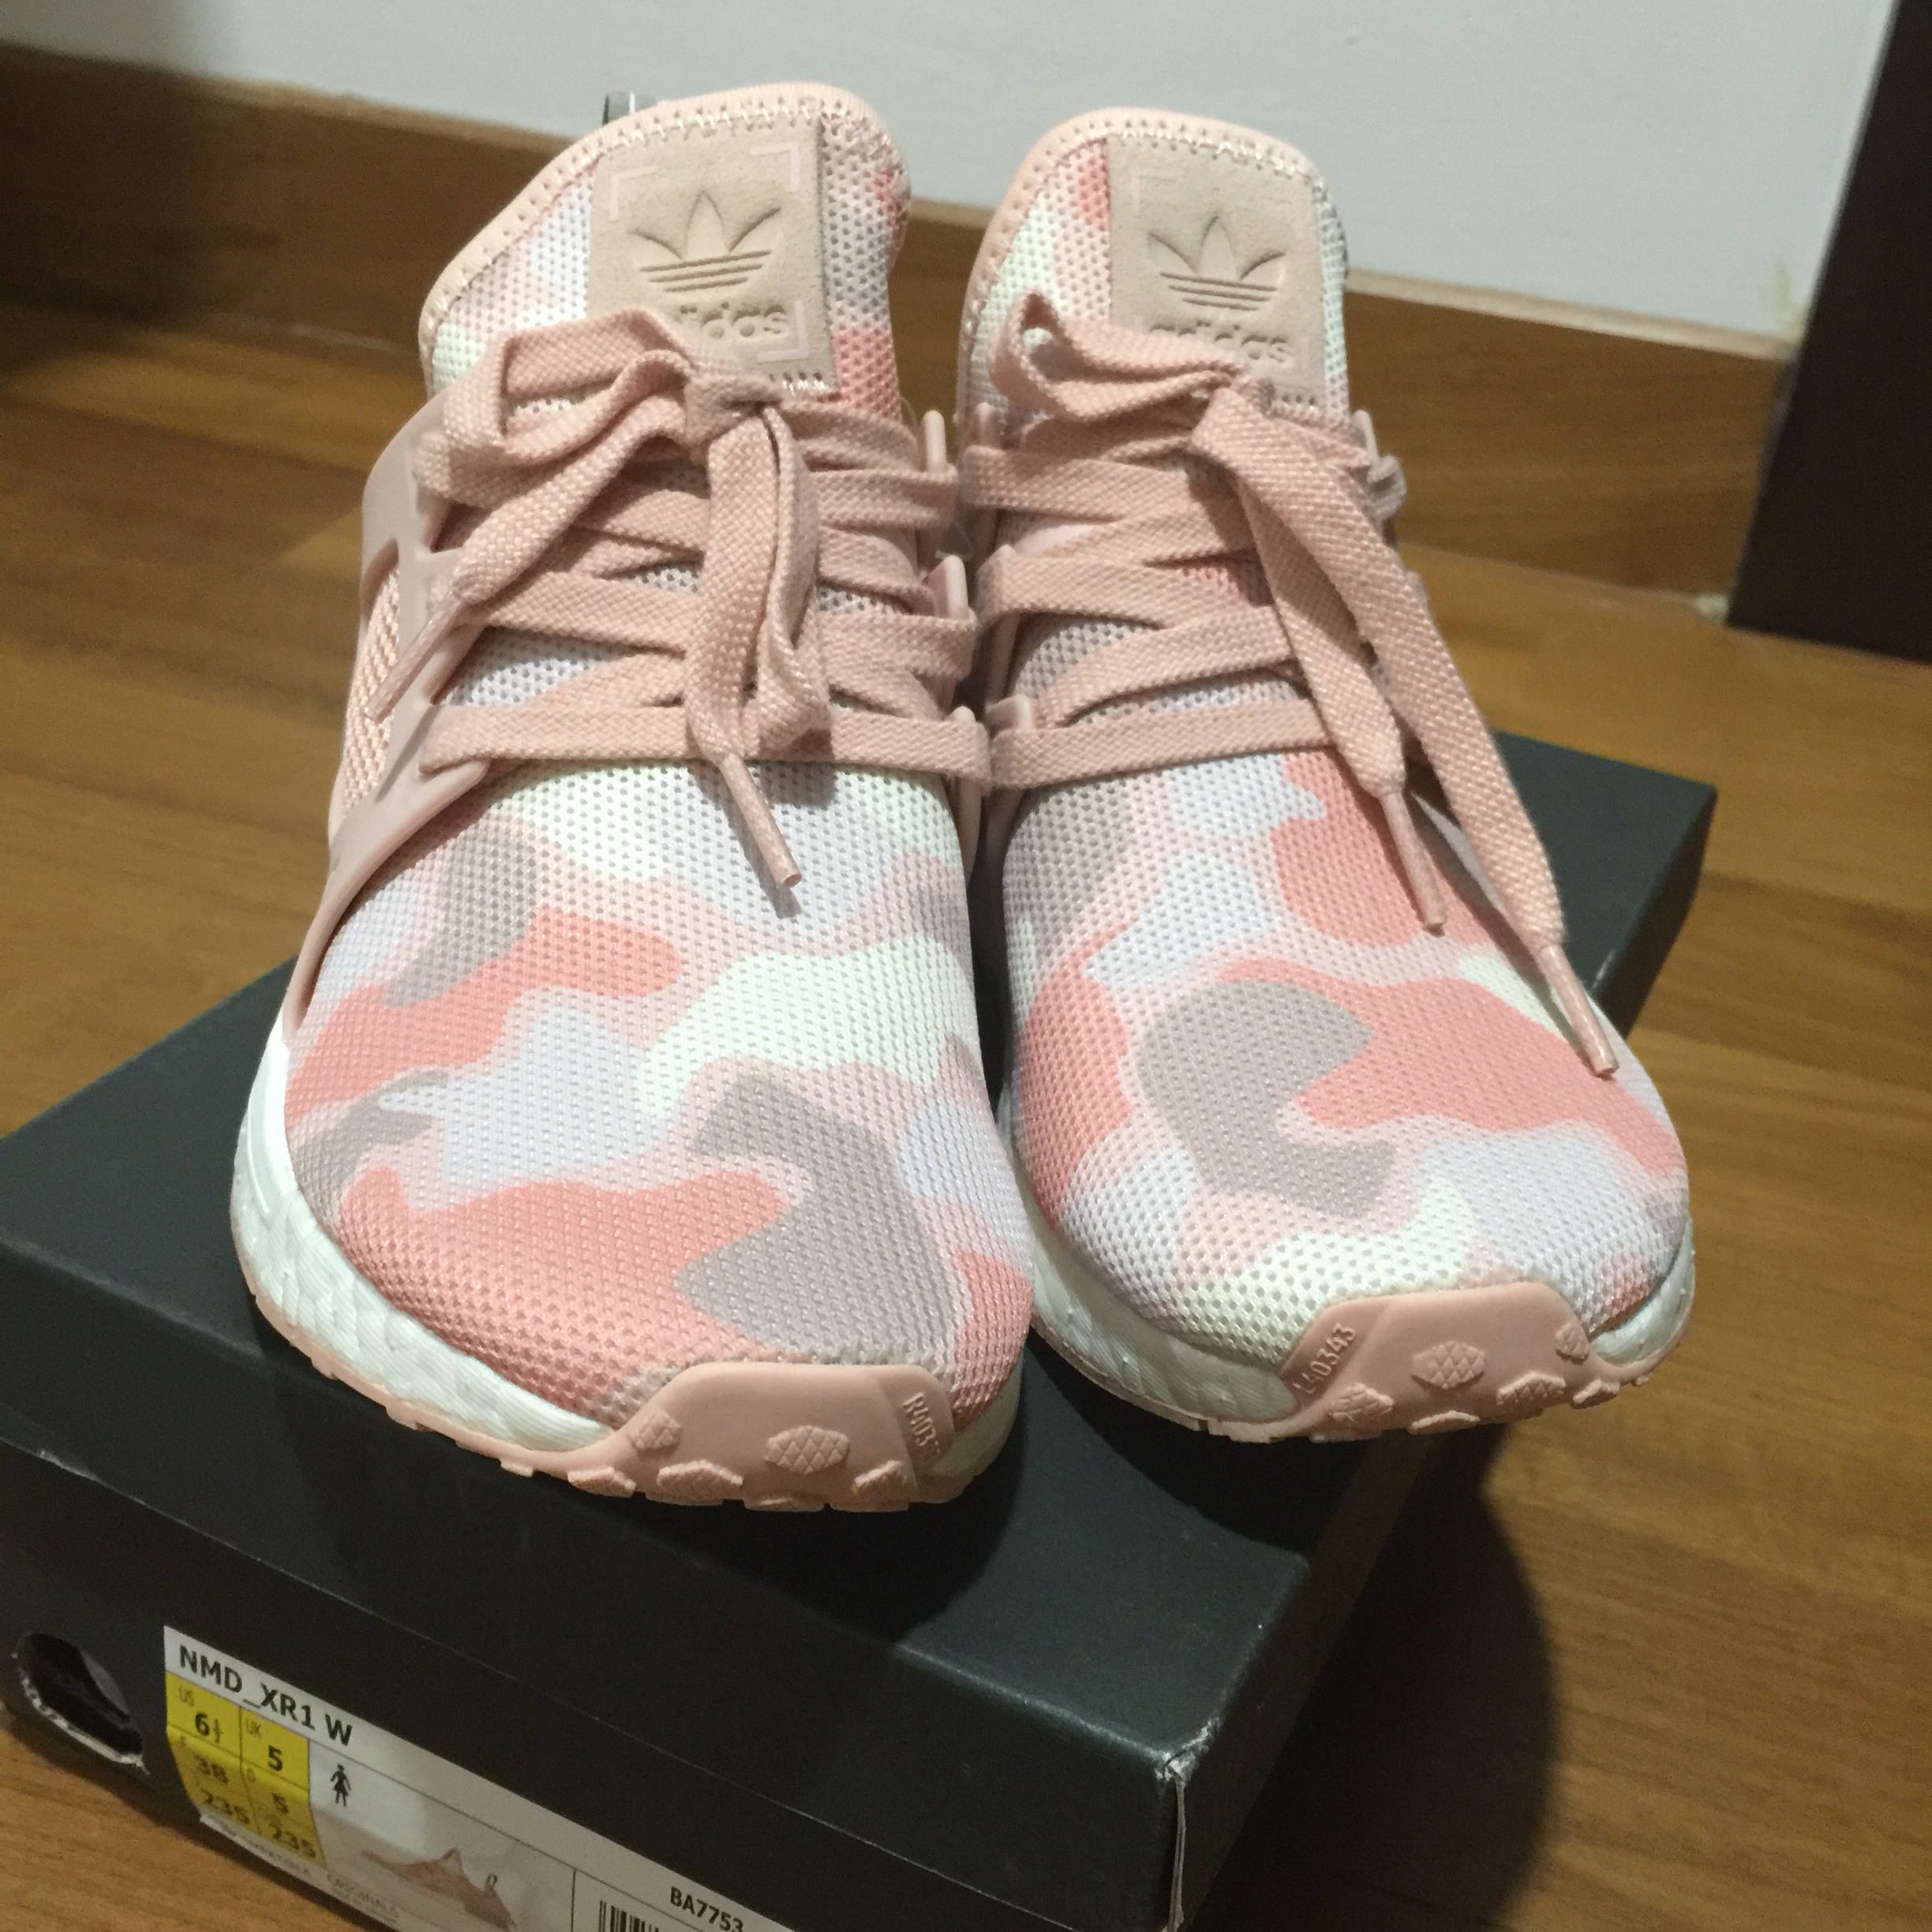 Authentic ADIDAS NMD XR1 (Pink camo 